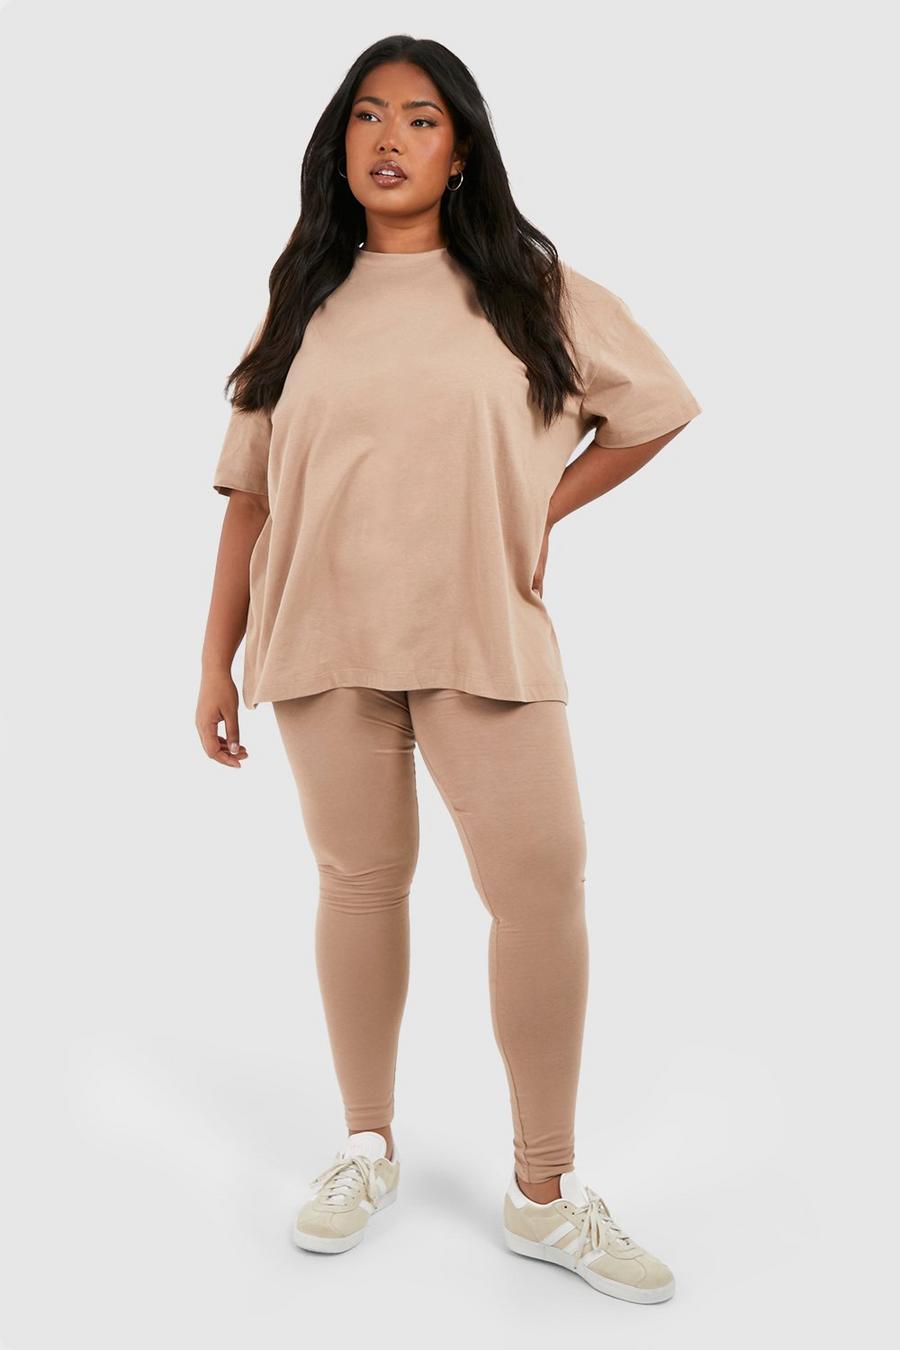 Plus Size Two Piece Sets For Women